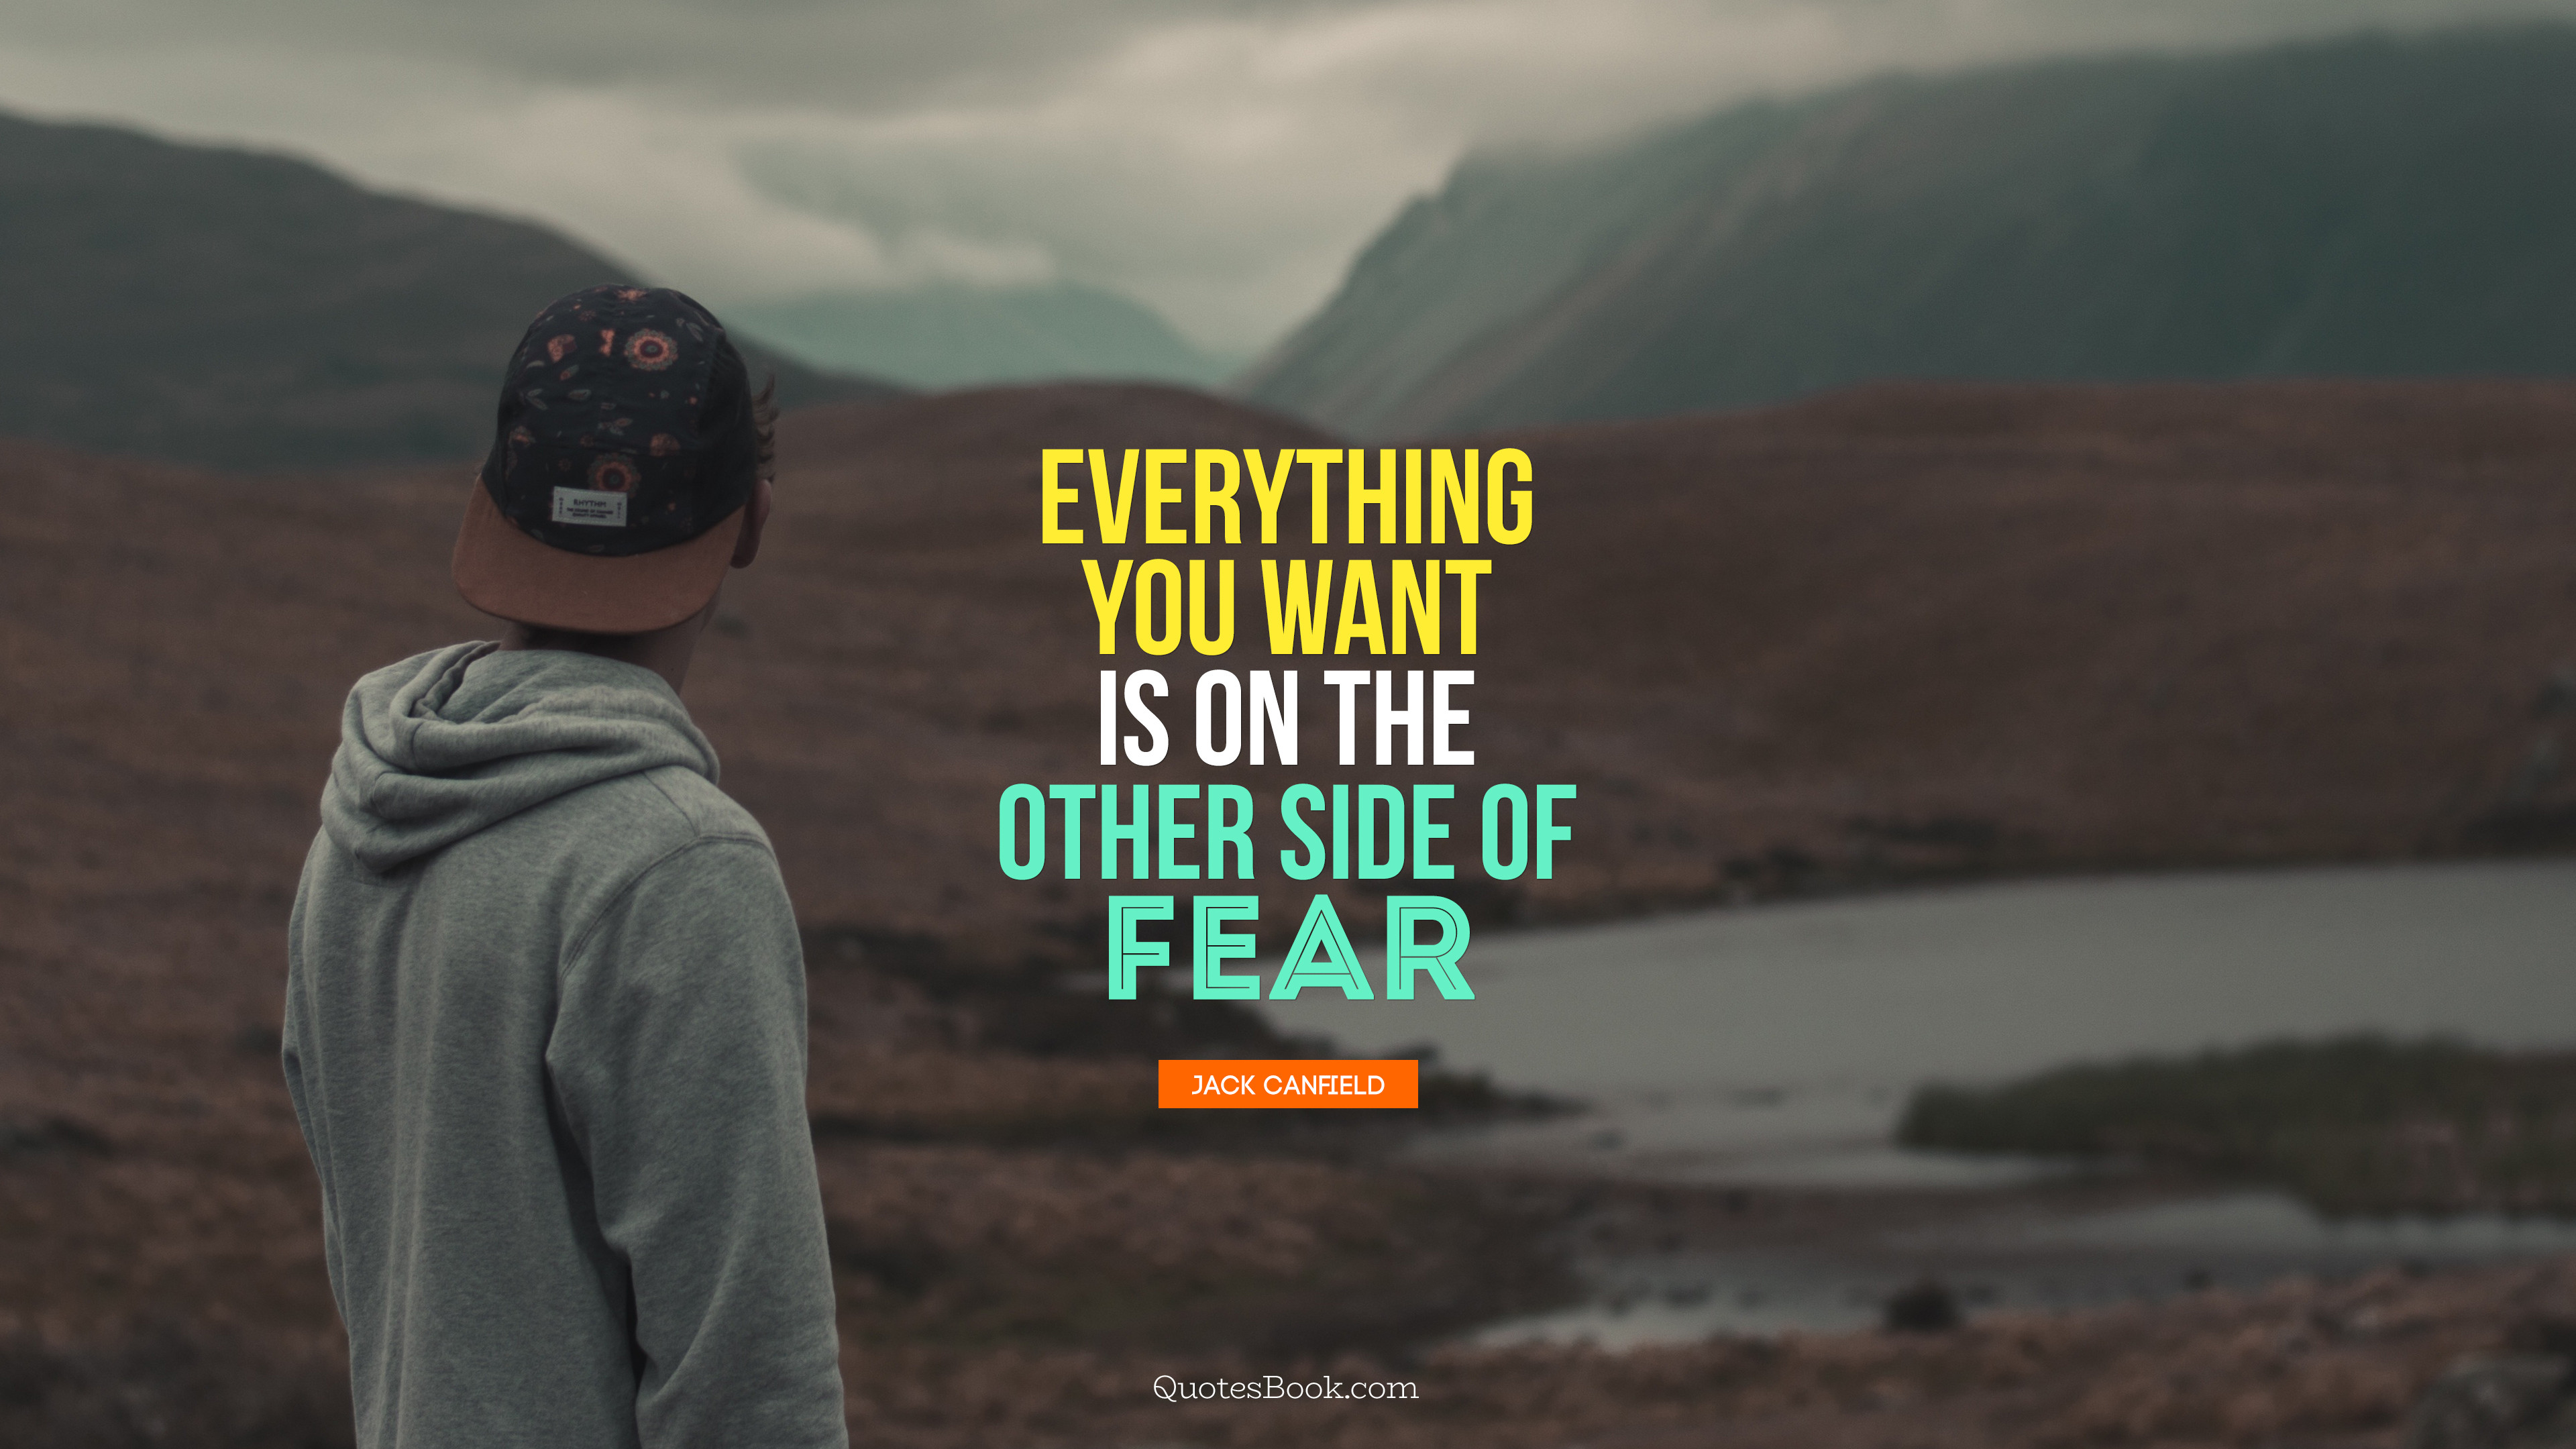 Everything you want is on the other side of fear. - Quote by Jack